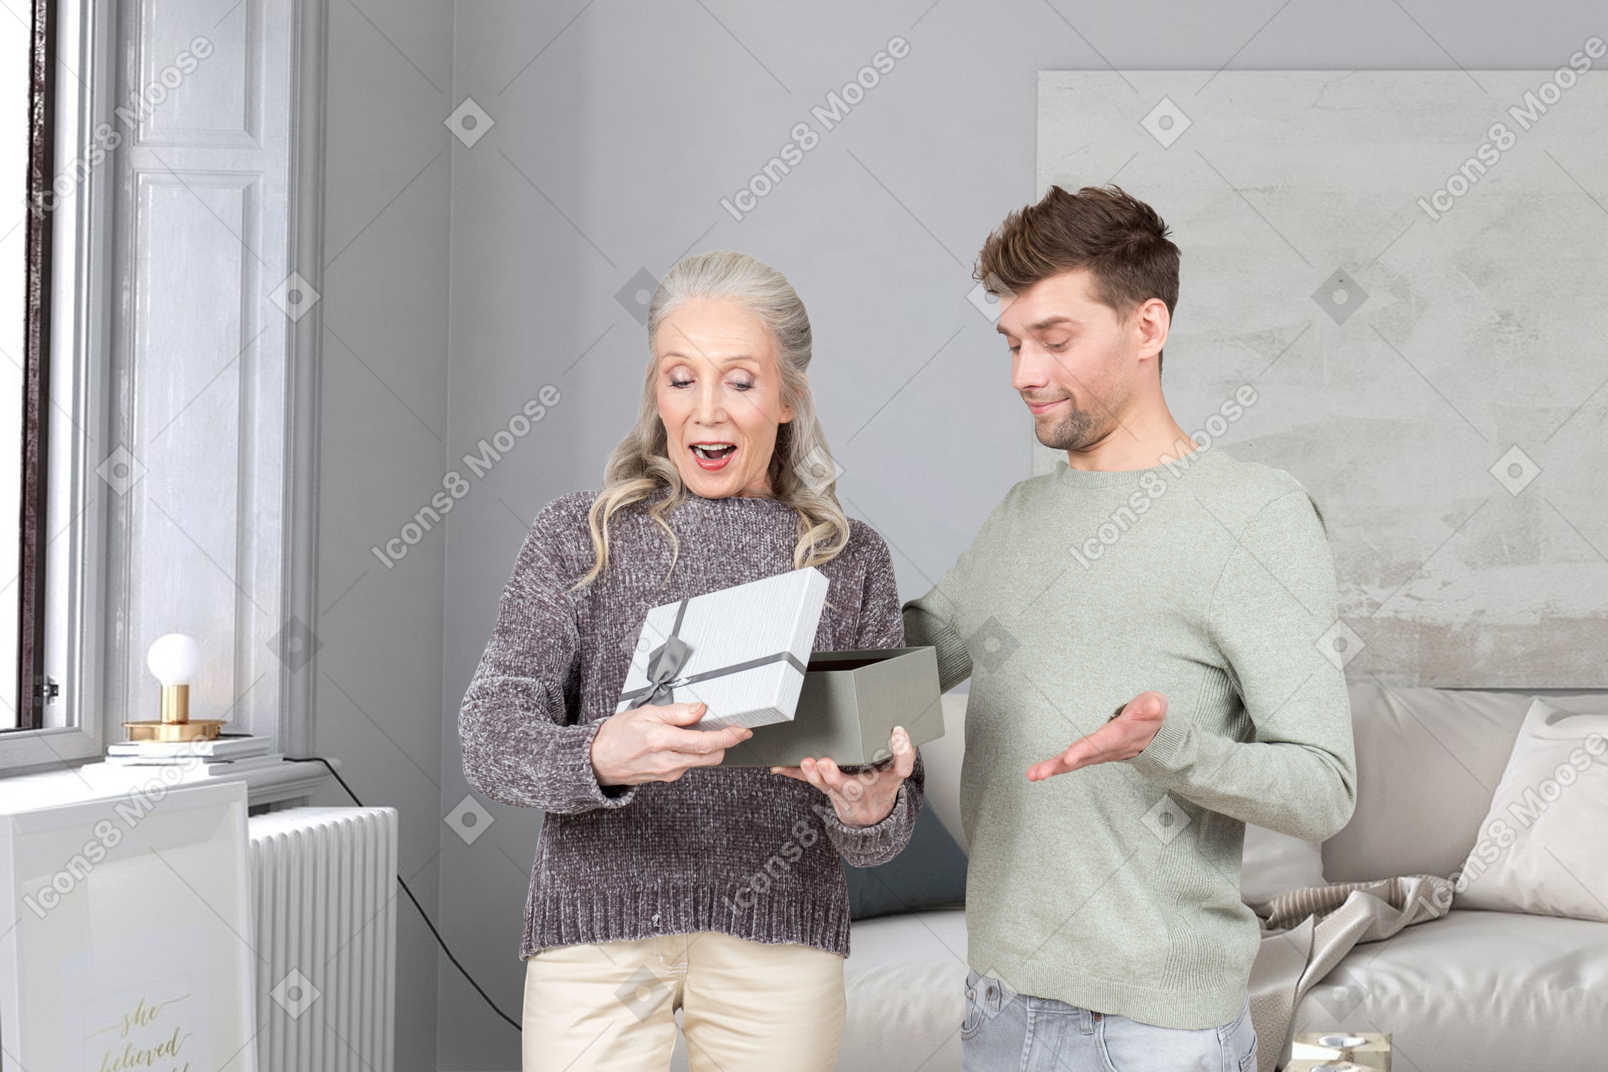 A man and a woman standing in a living room